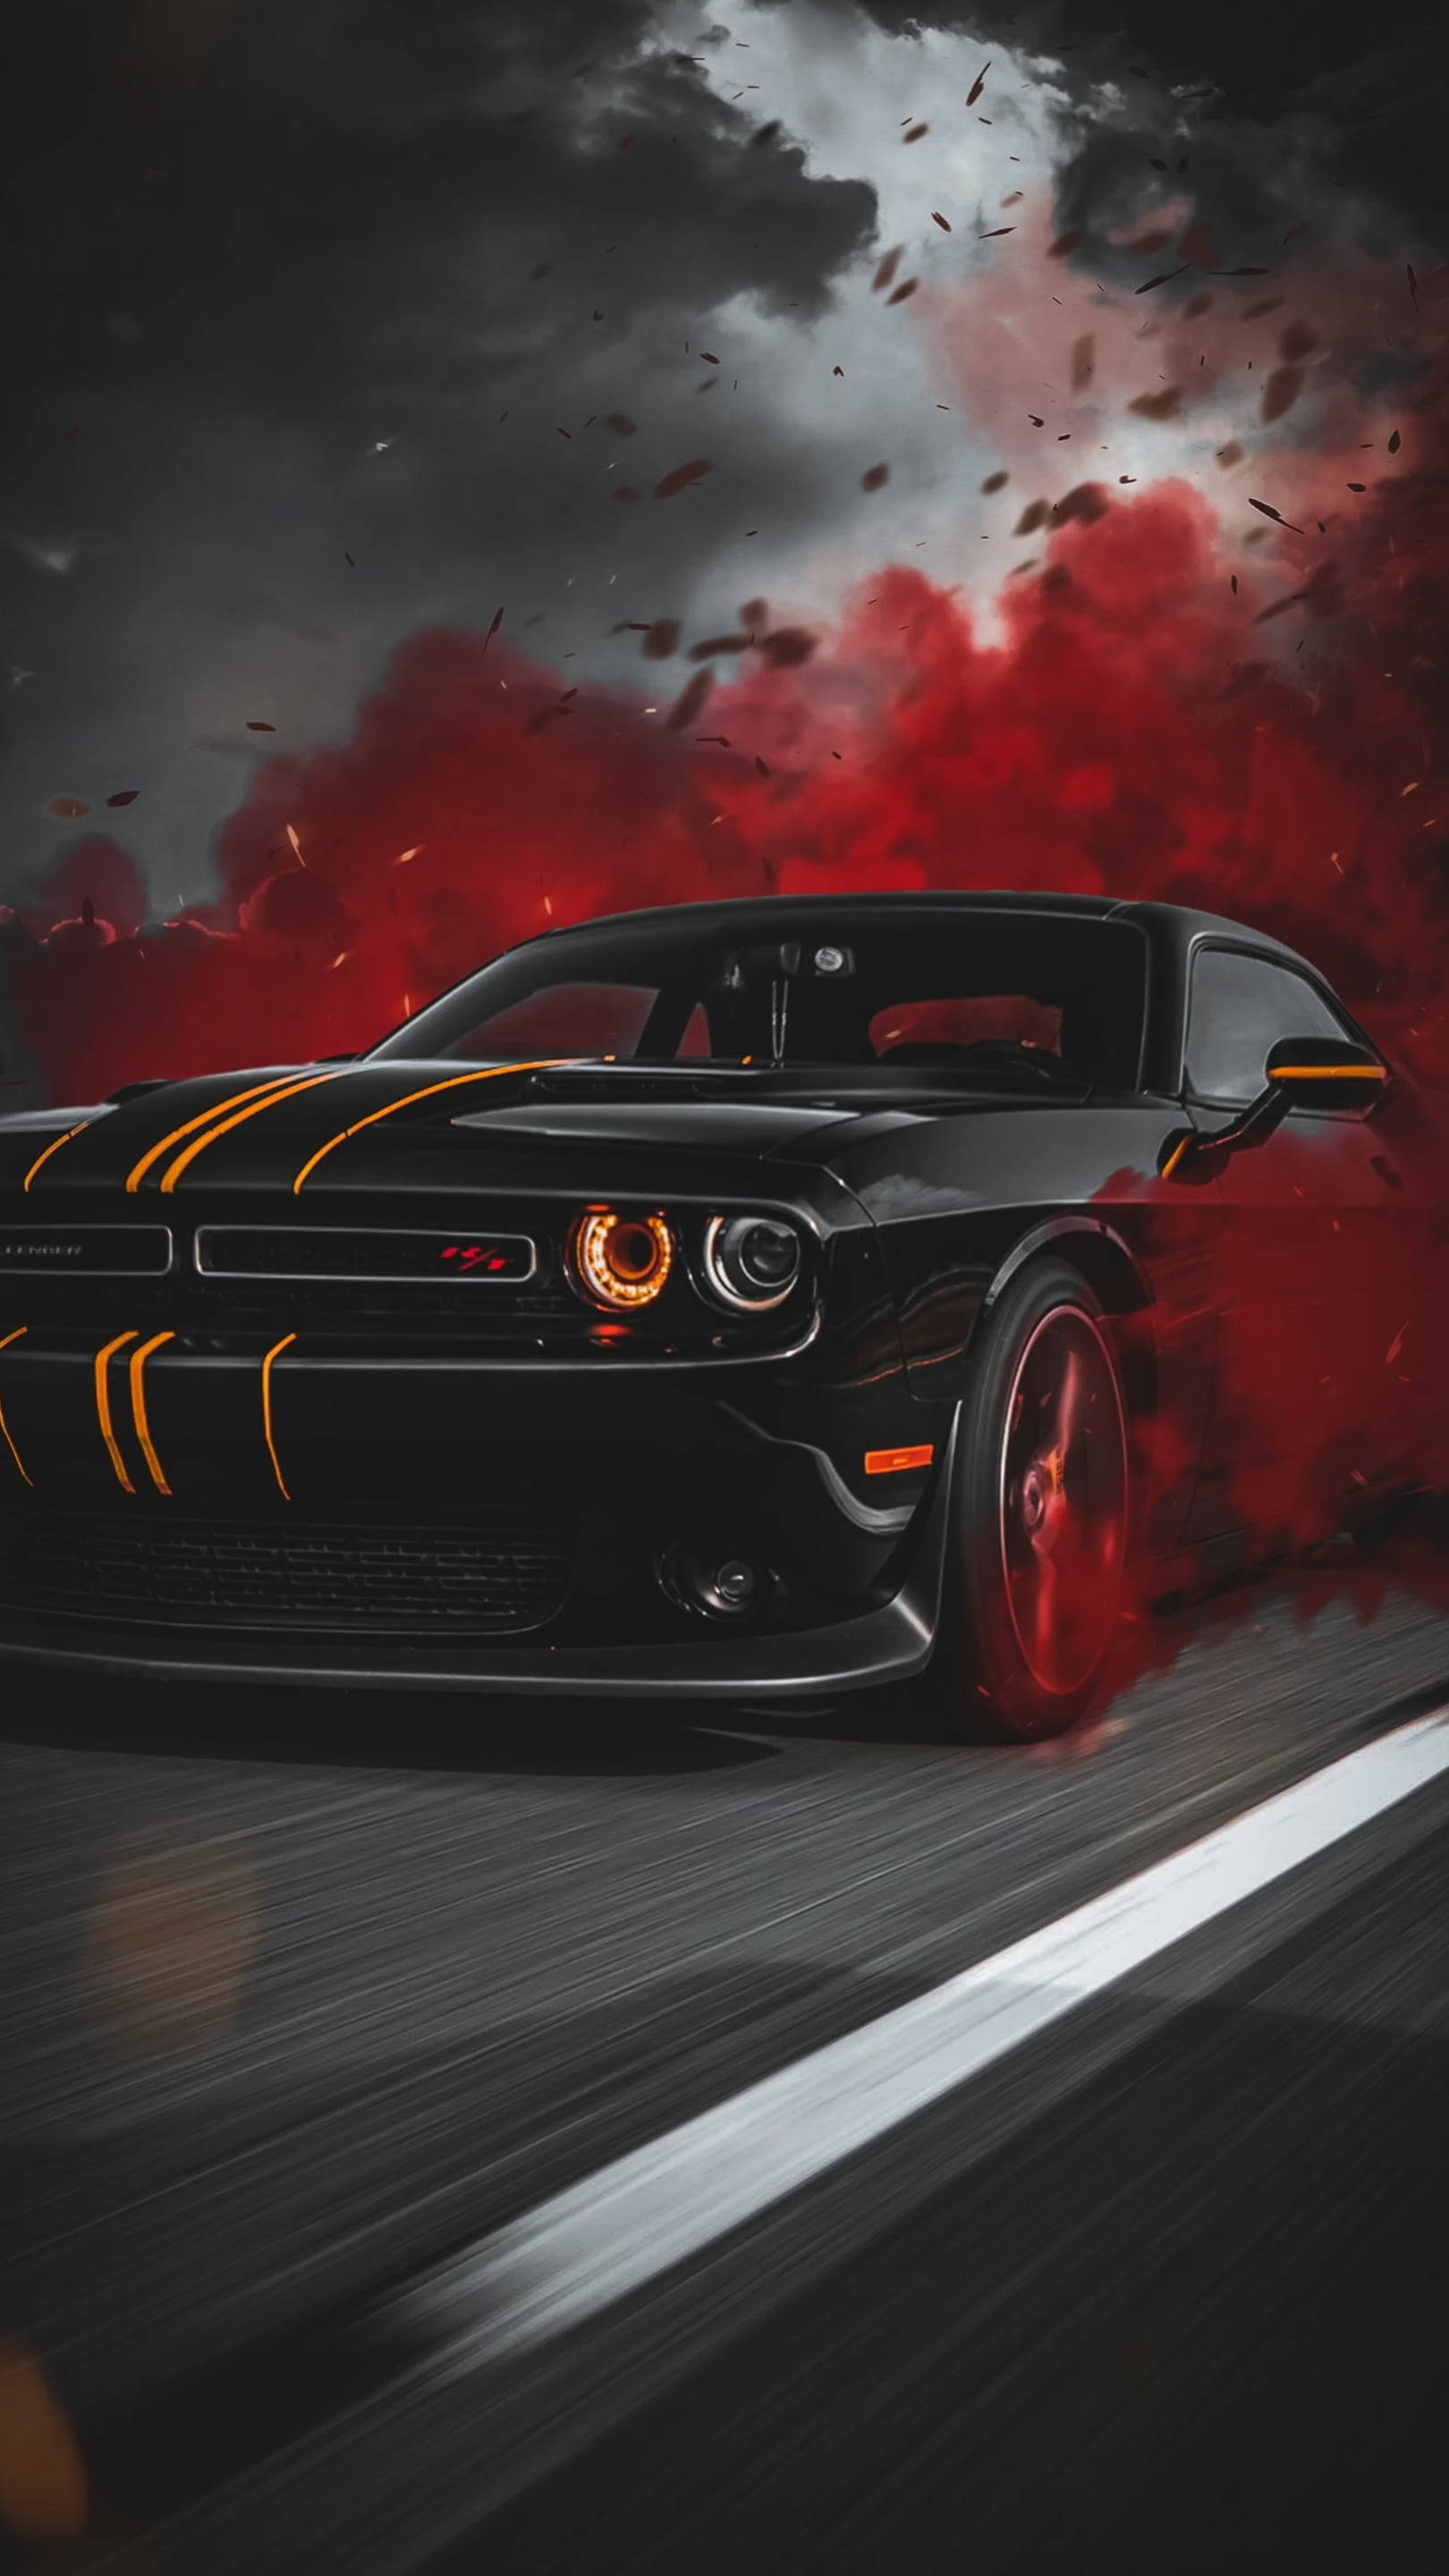 Black Car With Red Mist Speed Iphone Wallpaper